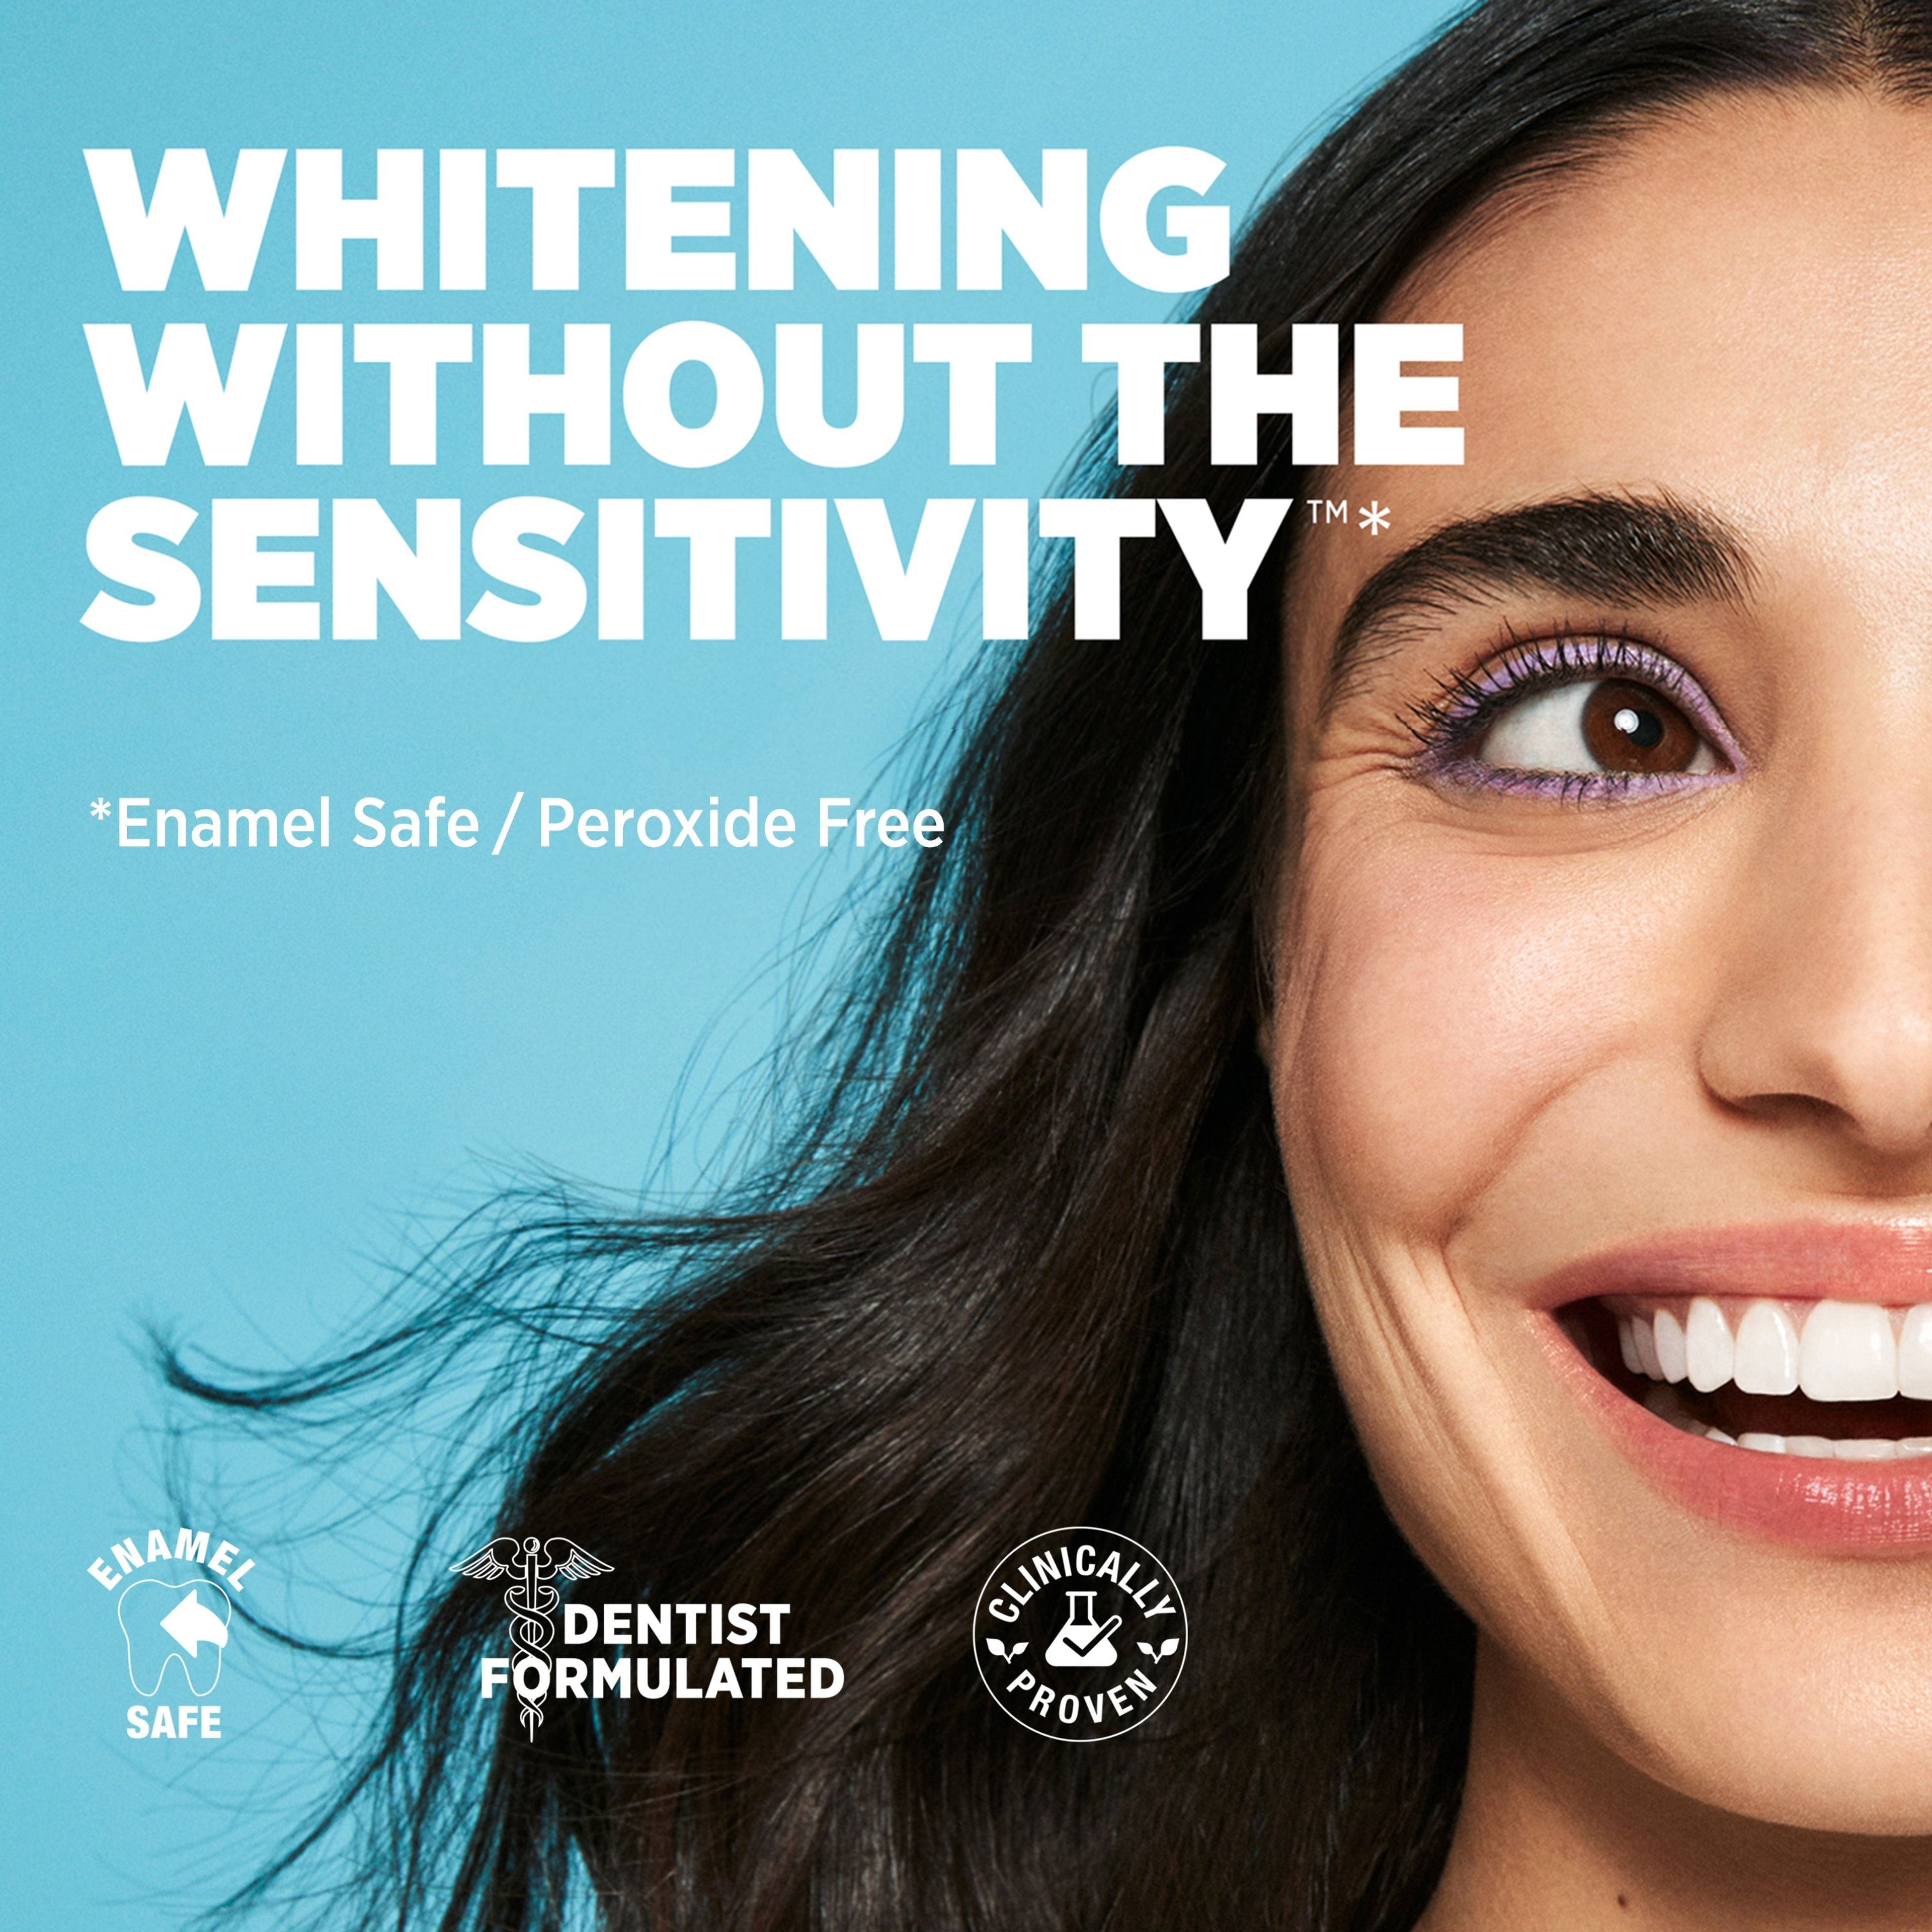 Lumineux The Whitening Kit that has *IT ALL*